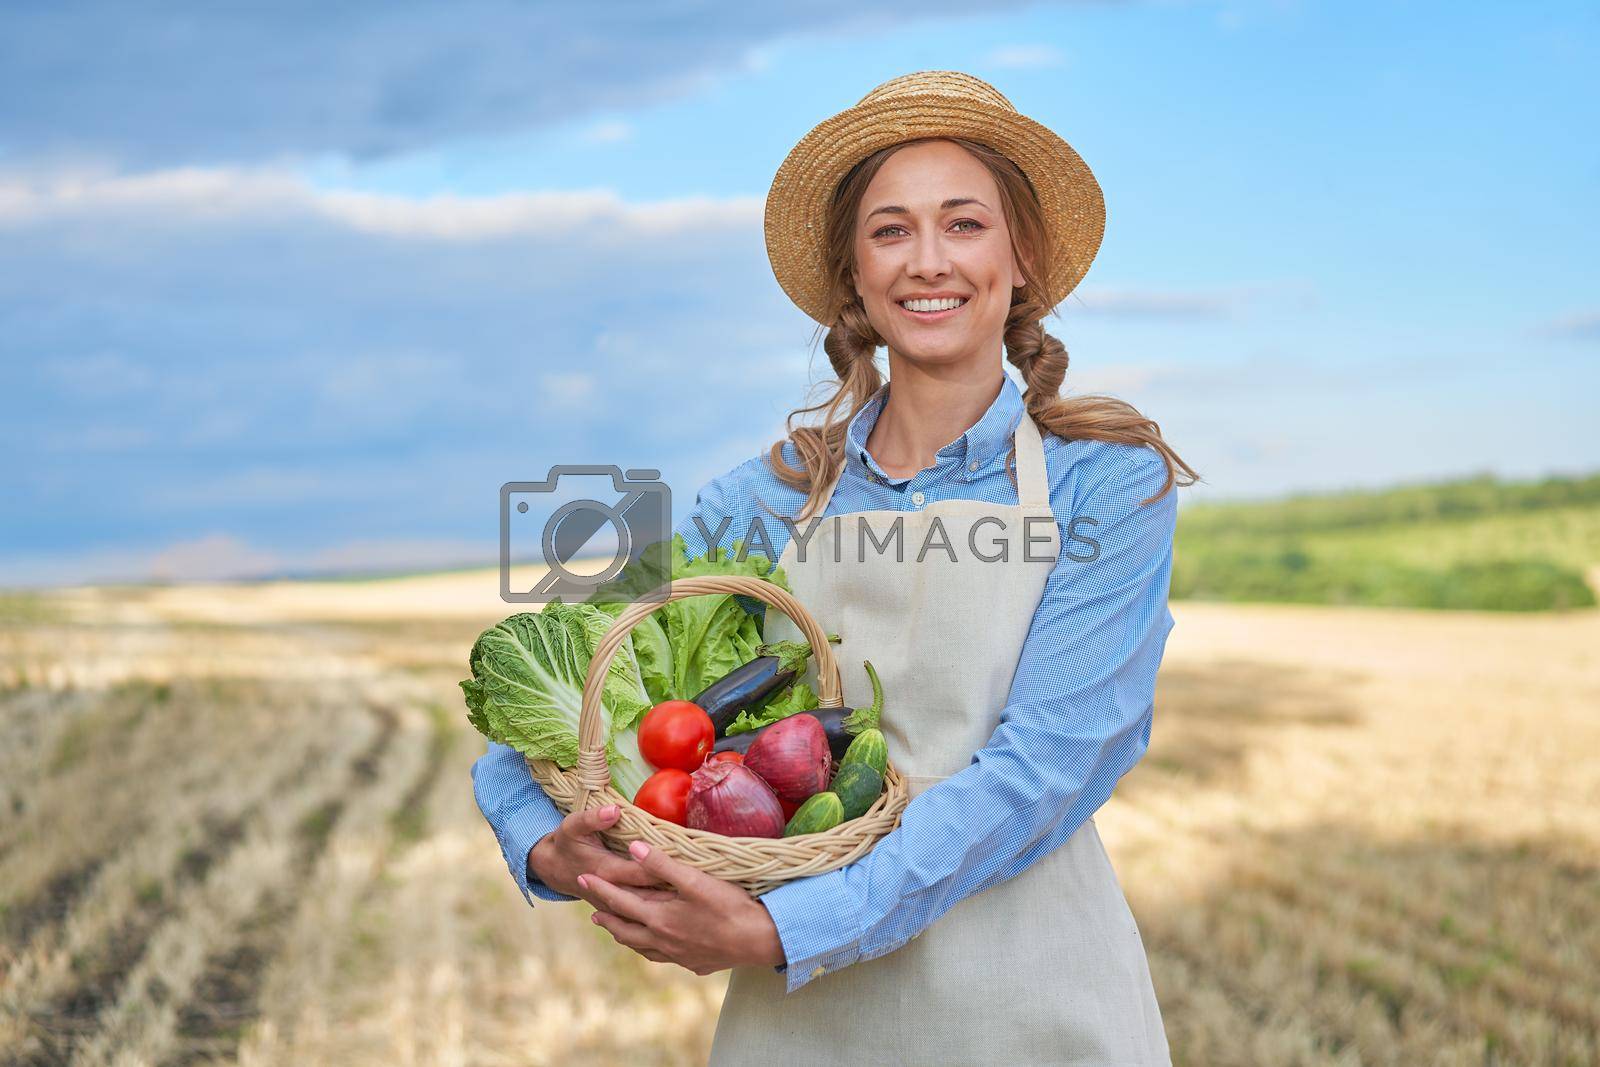 Royalty free image of Woman farmer straw hat apron standing farmland smiling Female agronomist specialist farming agribusiness Happy positive caucasian worker agricultural field by andreonegin